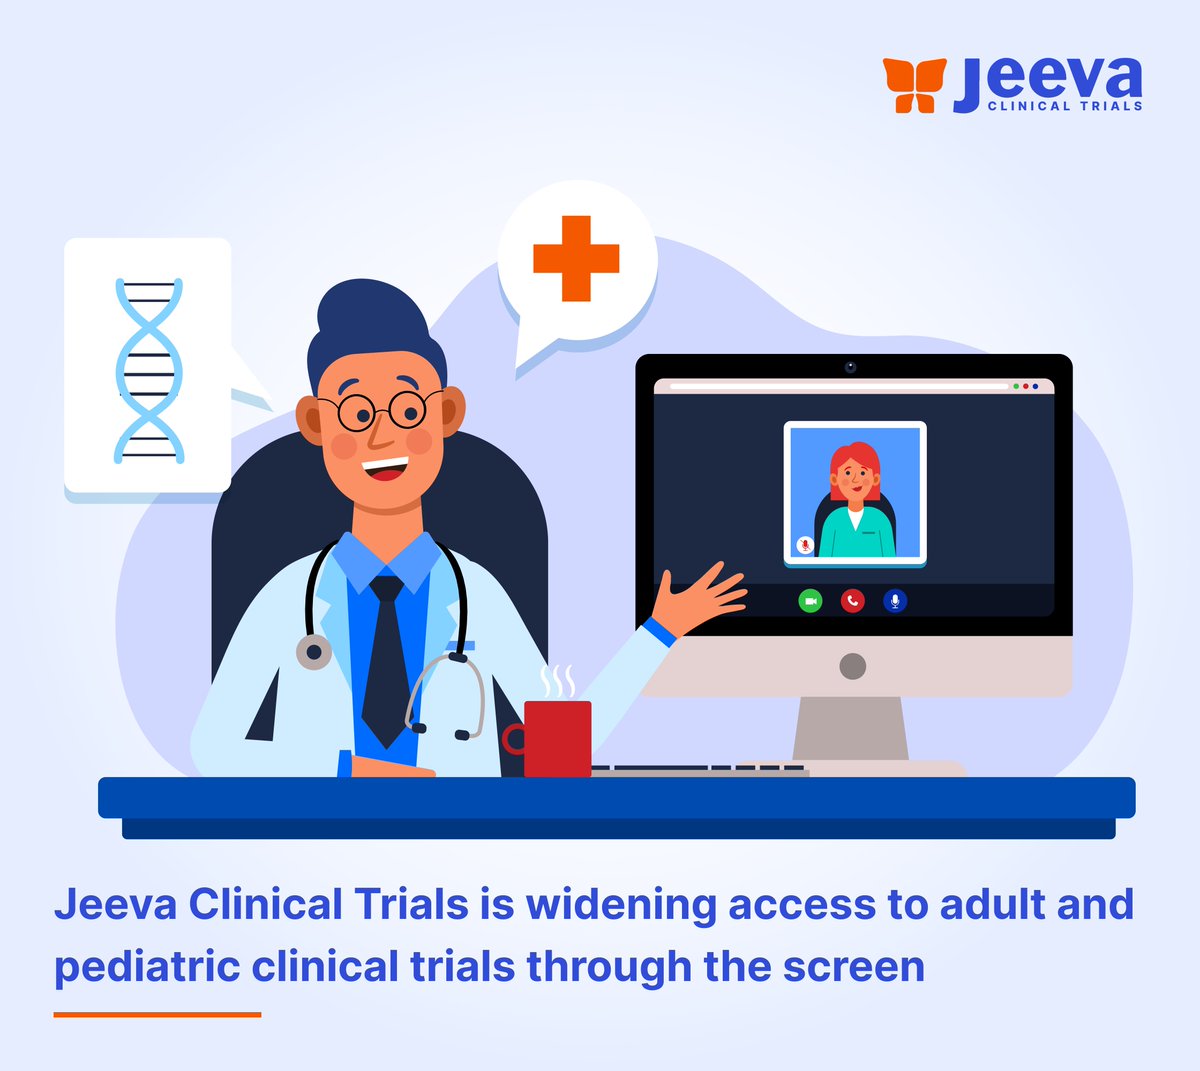 Our Founder & CEO Dr. @Harsharajasimha, Ph.D., leads @Jeevatrials' innovative #telehealth solutions, widening access to adult & pediatric #clinicaltrials to break barriers & enhance accessibility. Read more in @cancerwellmag: hubs.la/Q02rDVKc0 #Innovation #jeevatrials